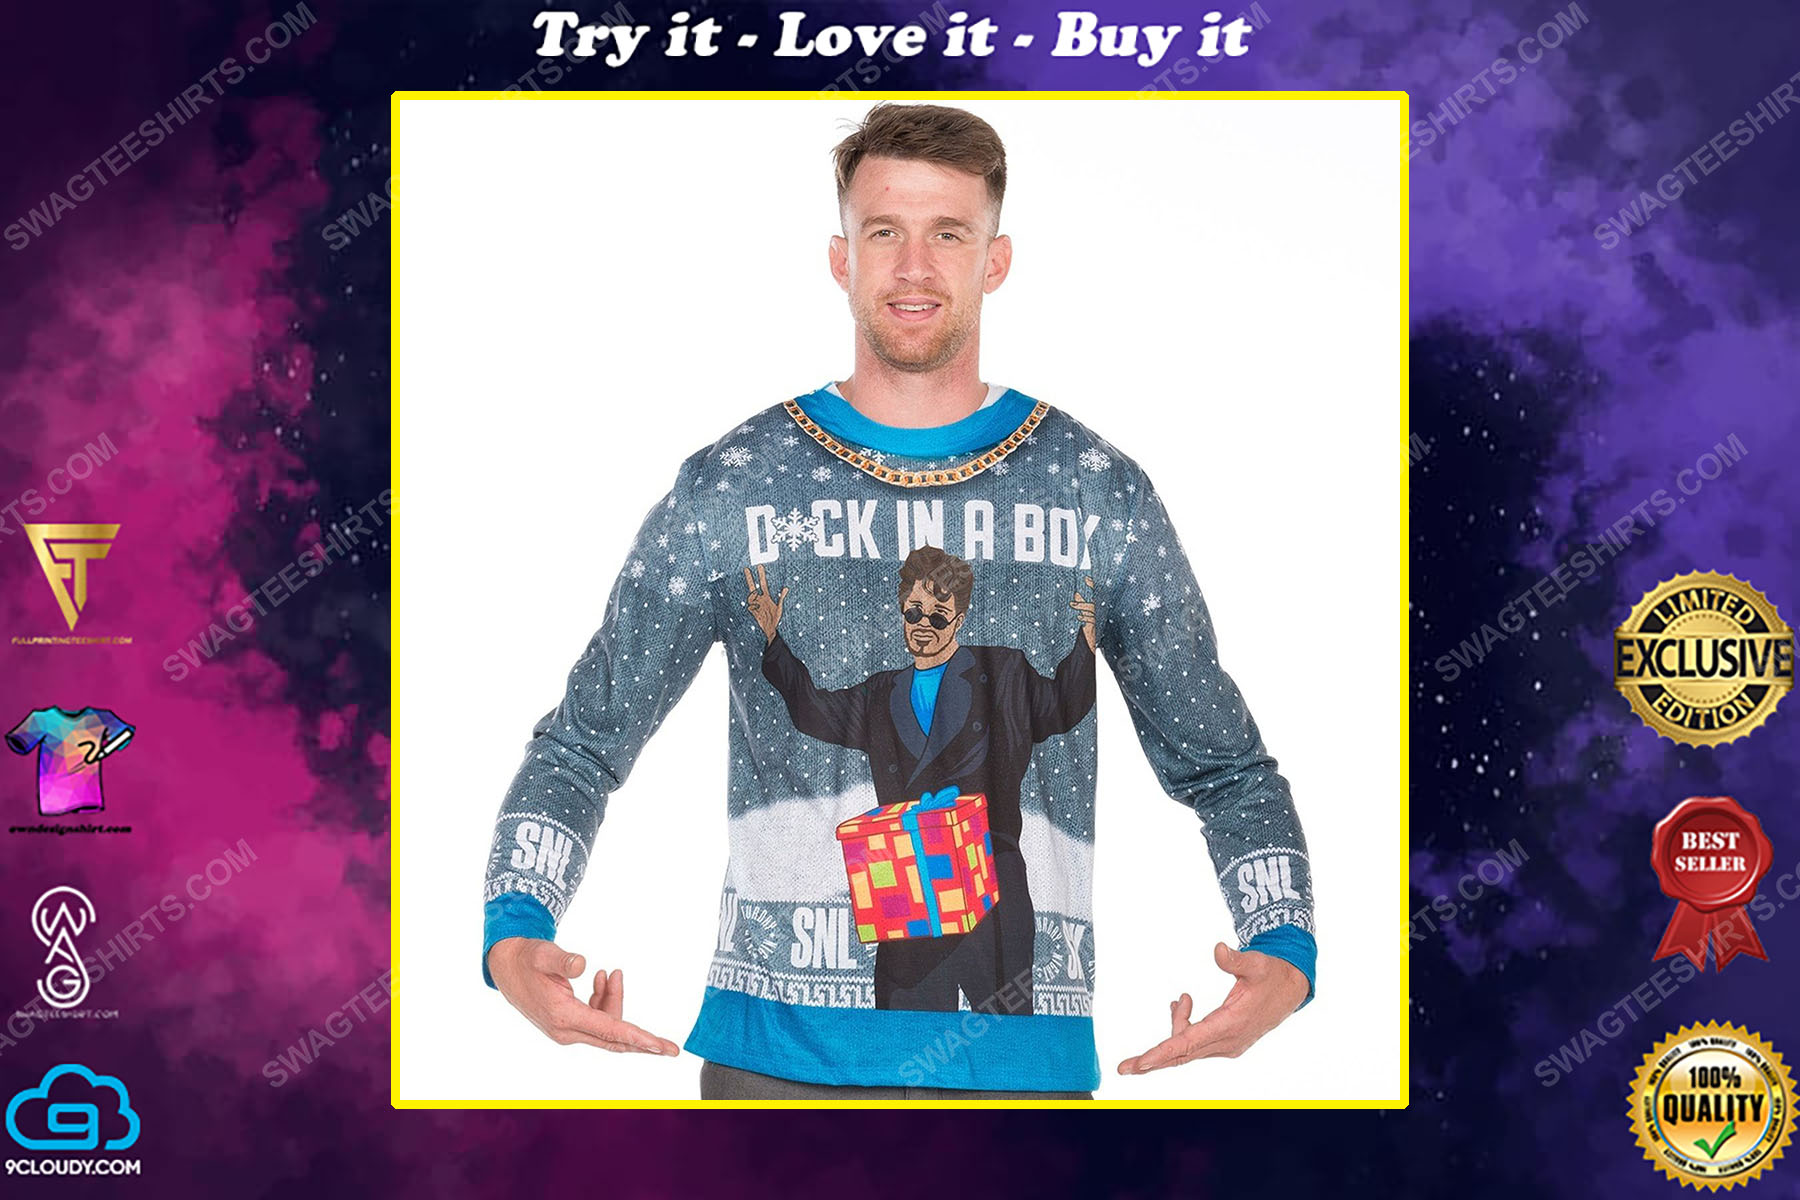 Dick in a box full print ugly christmas sweater